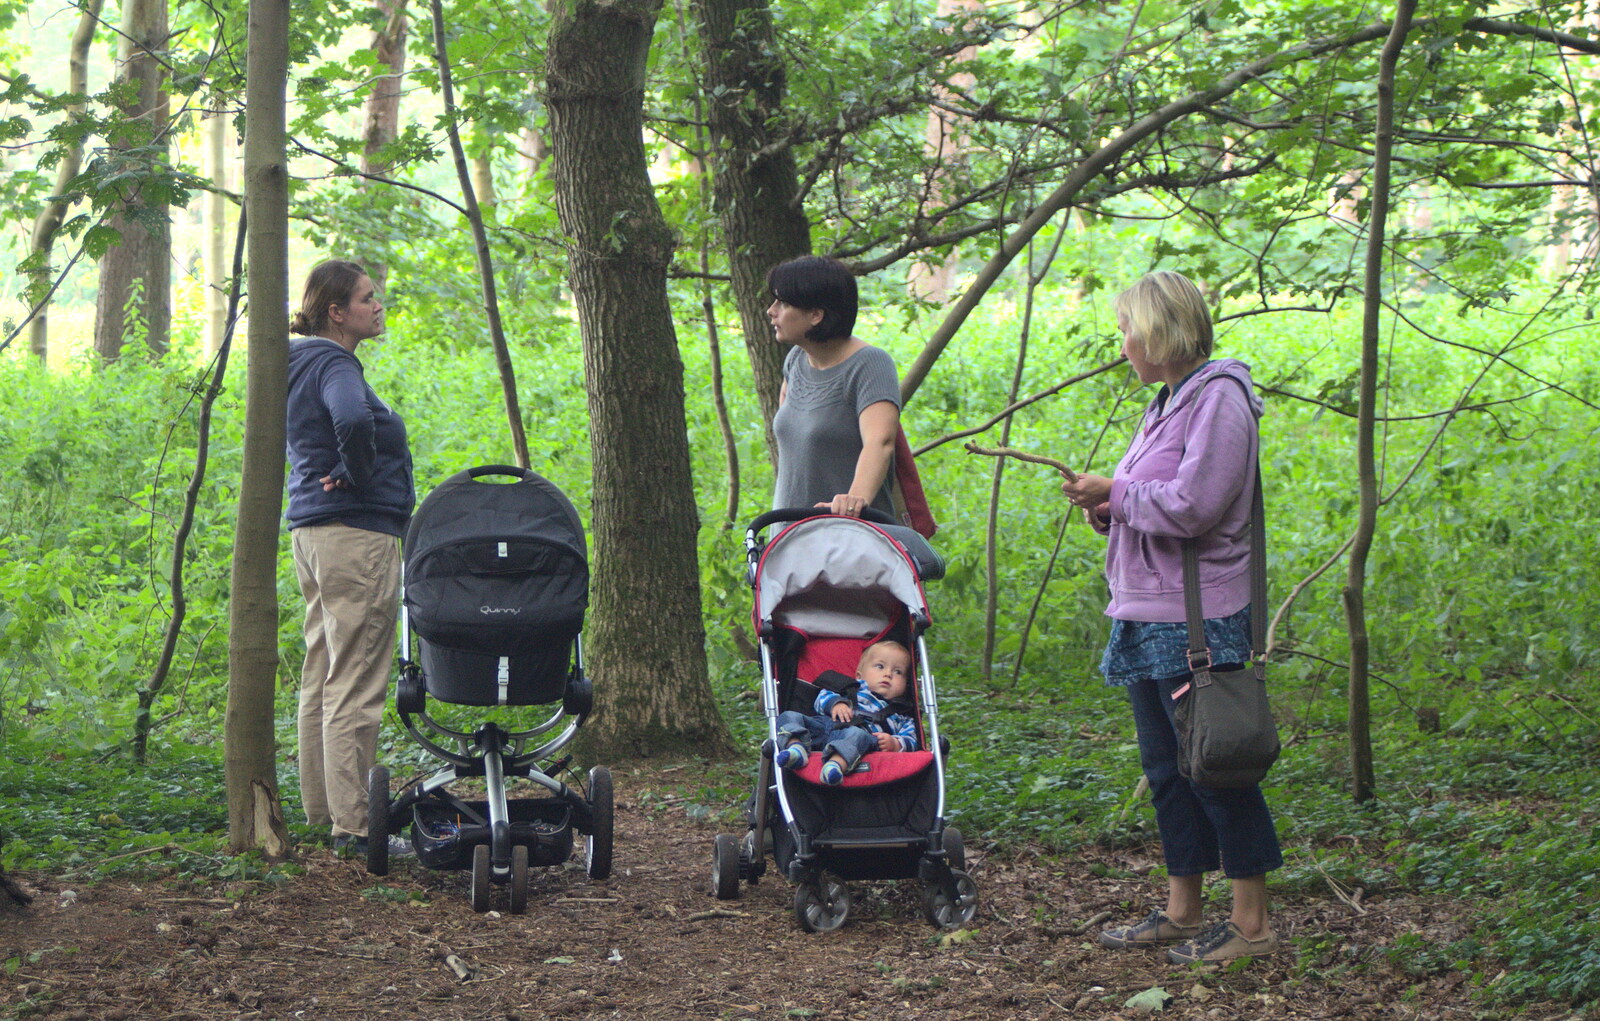 There's a pause for a chat in the woods from Camping at Dower House, West Harling, Norfolk - 1st September 2012